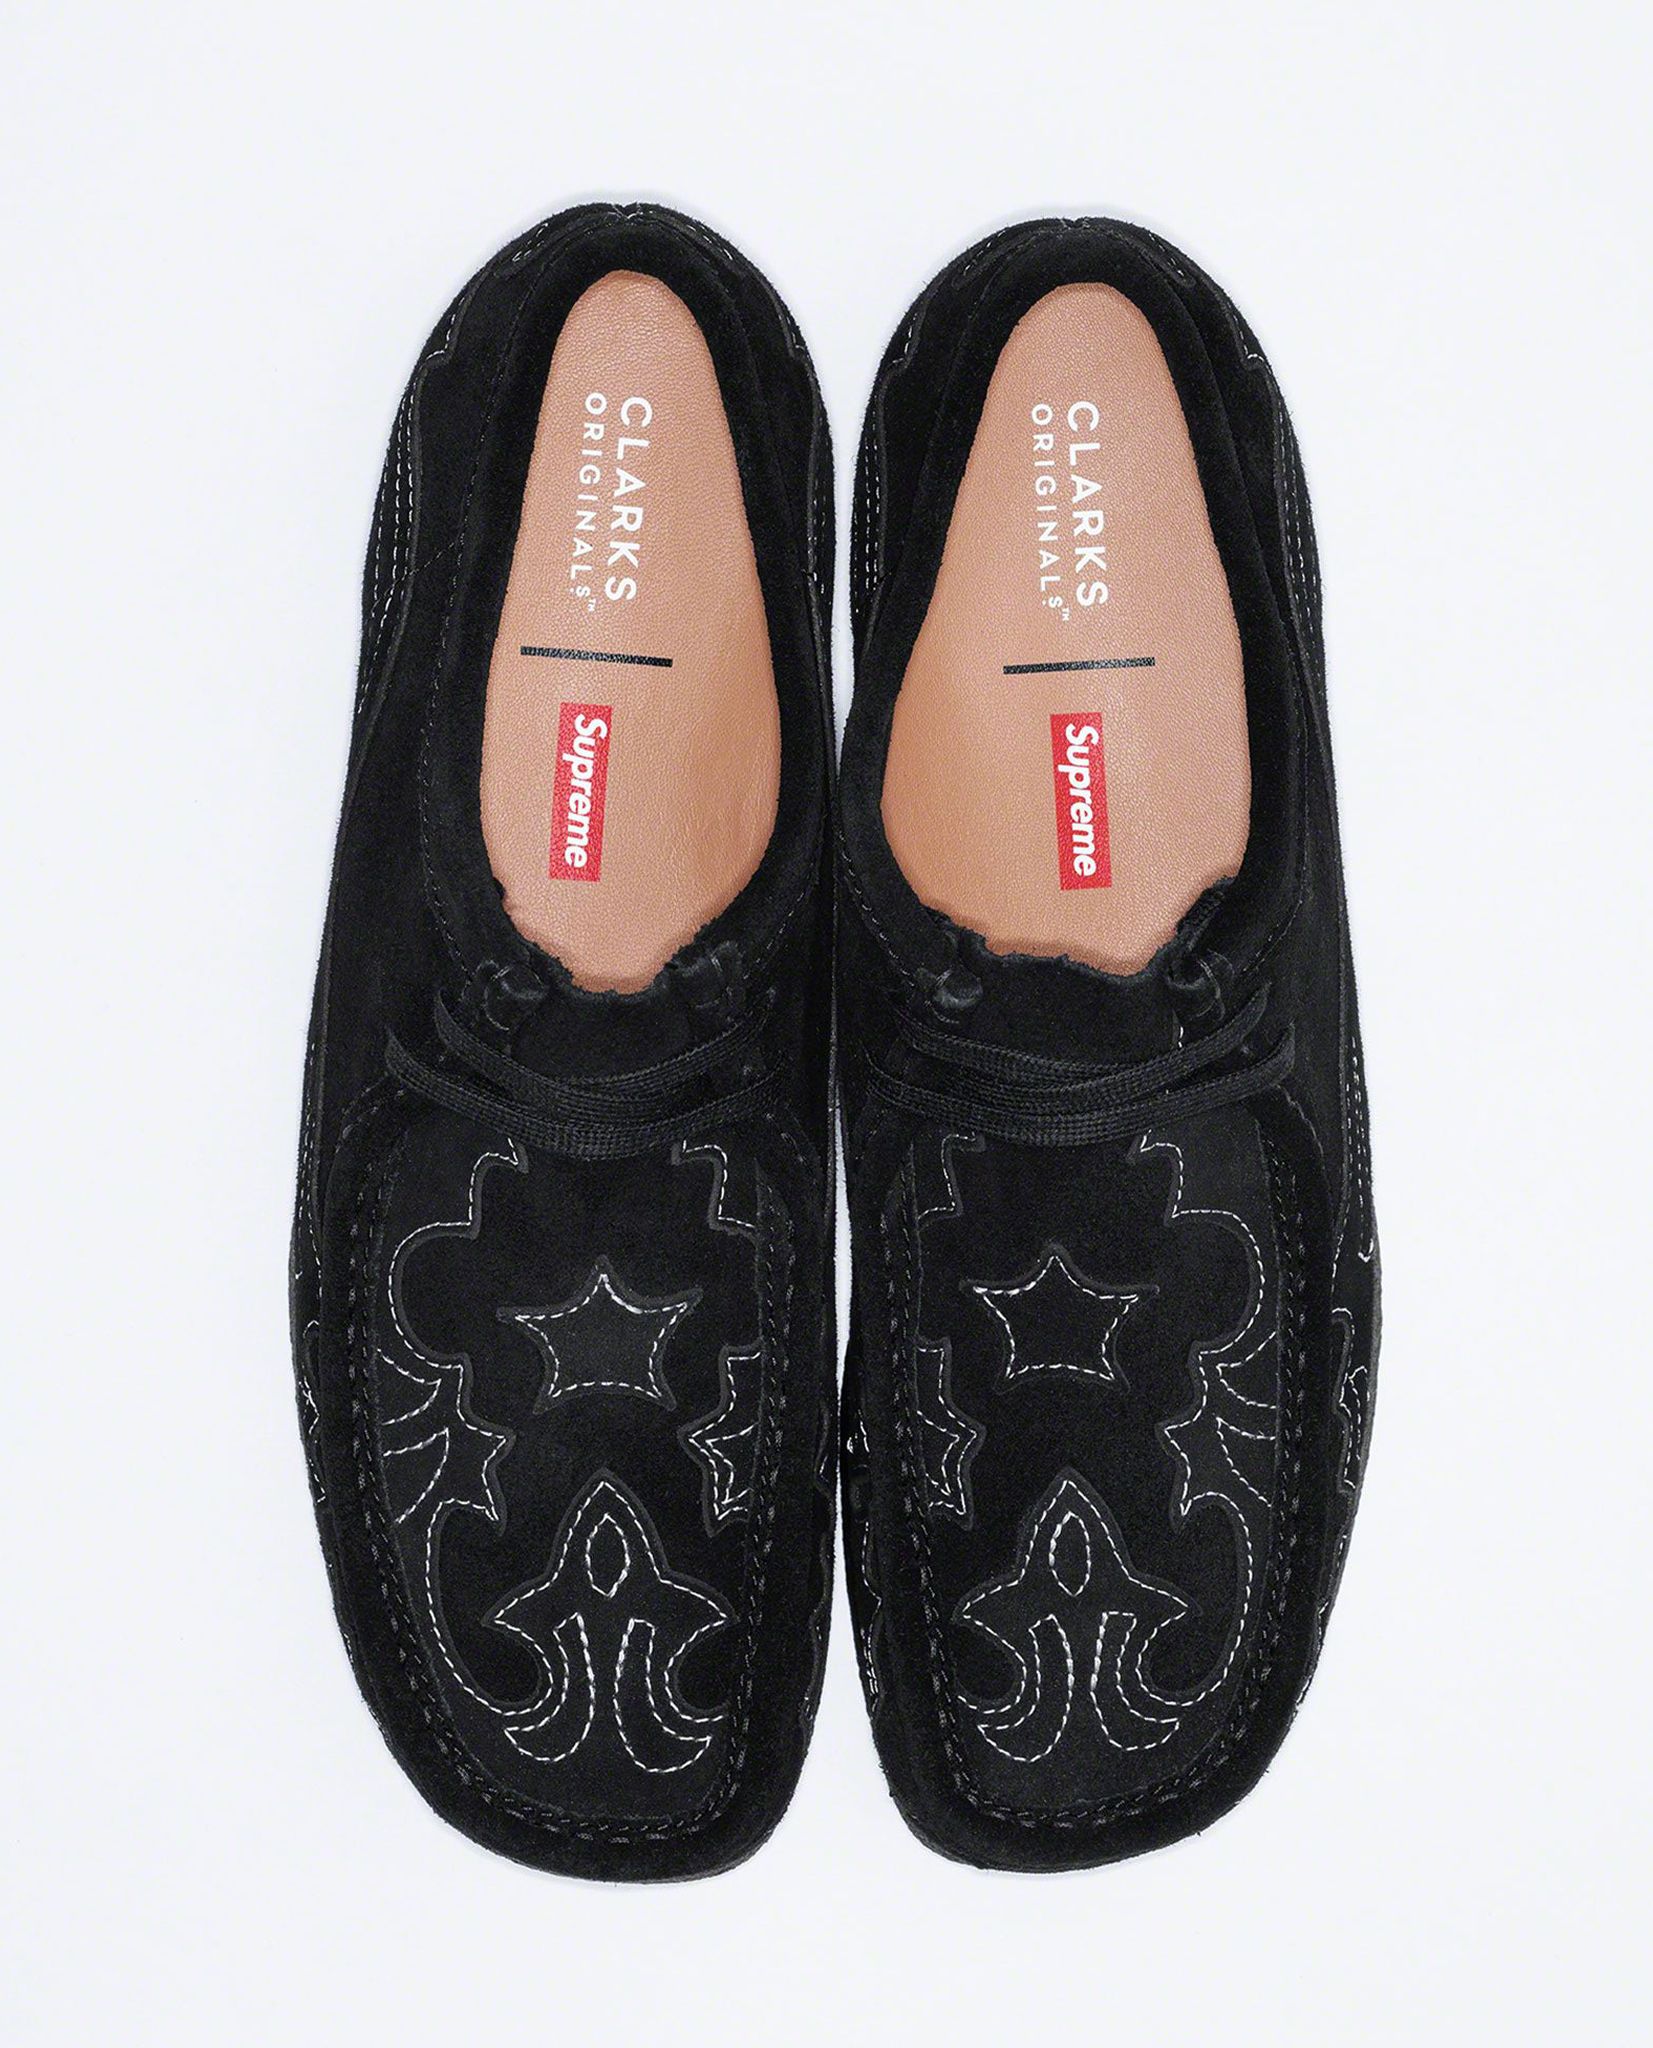 Where to Buy the Supreme x Clarks Wallabee Spring 2023 Collection